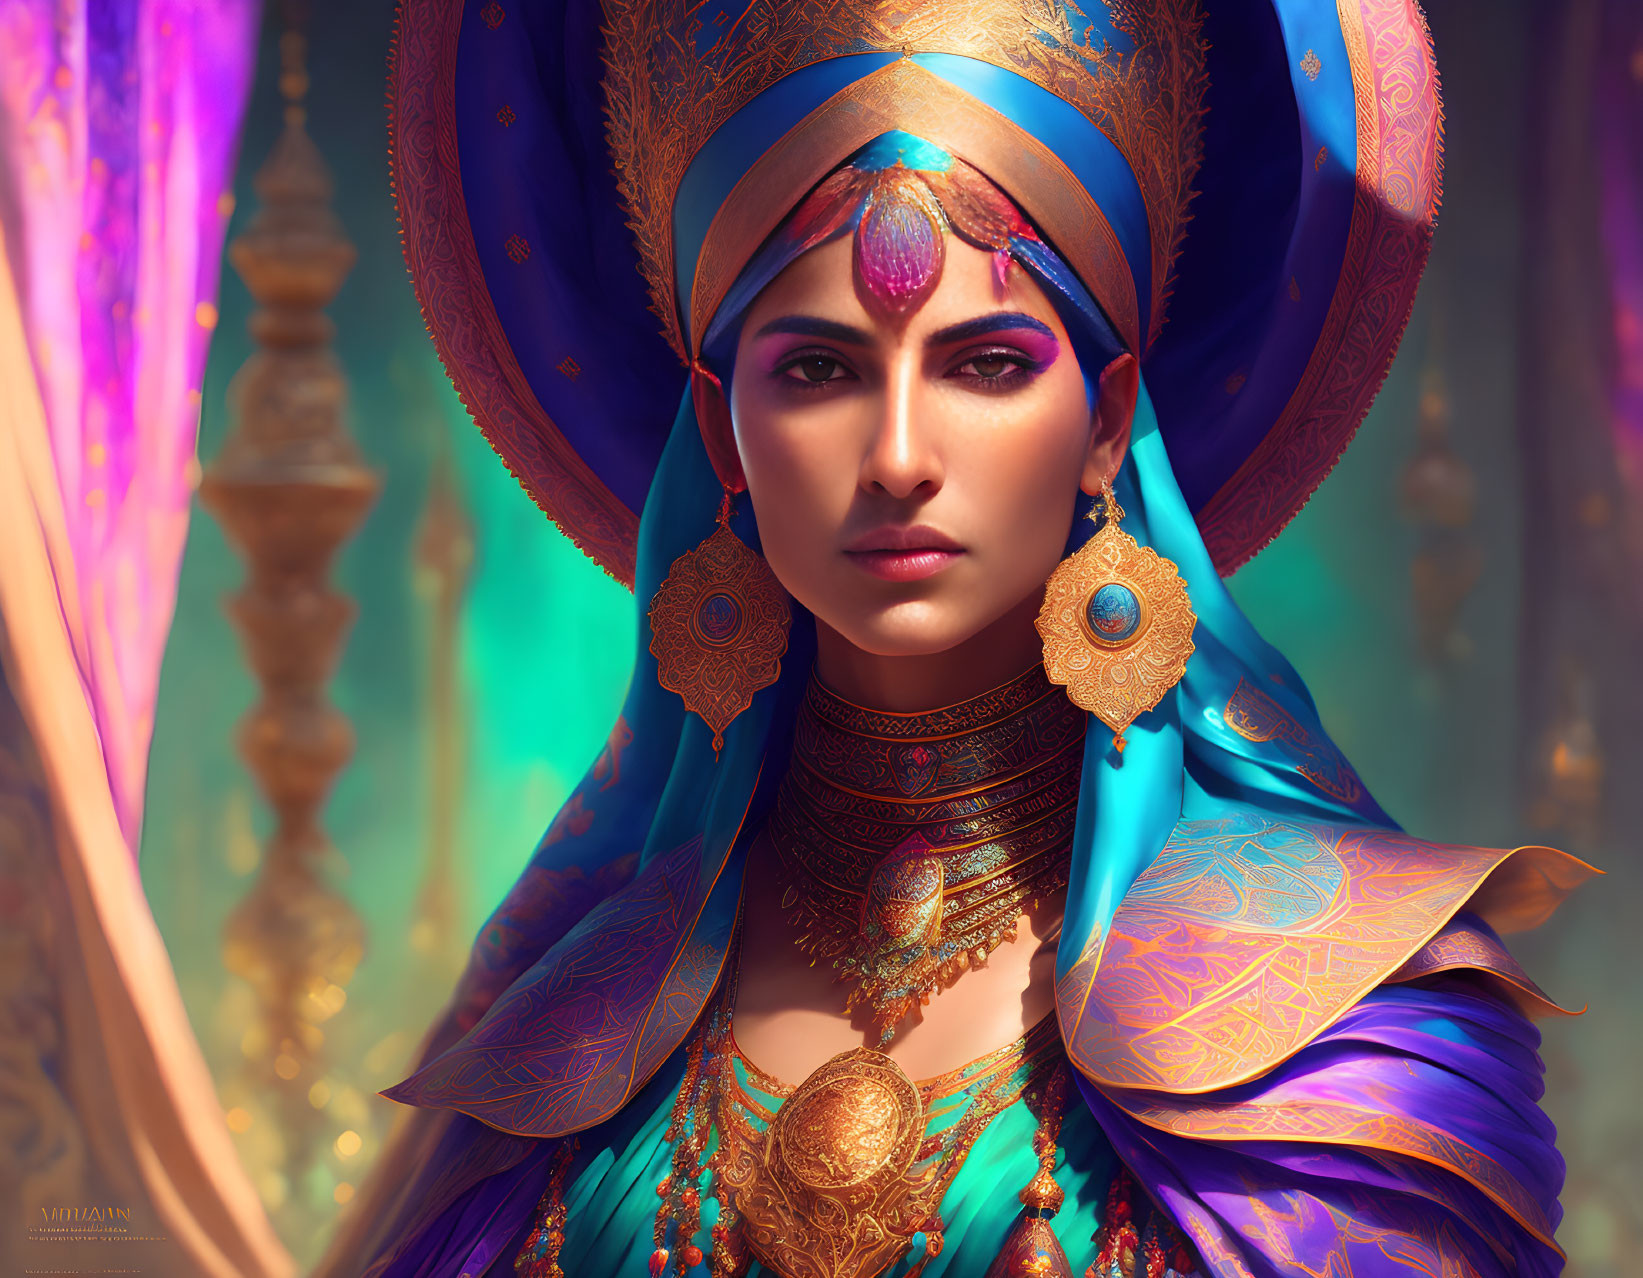 Regal woman in ornate blue and gold attire with intricate jewelry against colorful backdrop